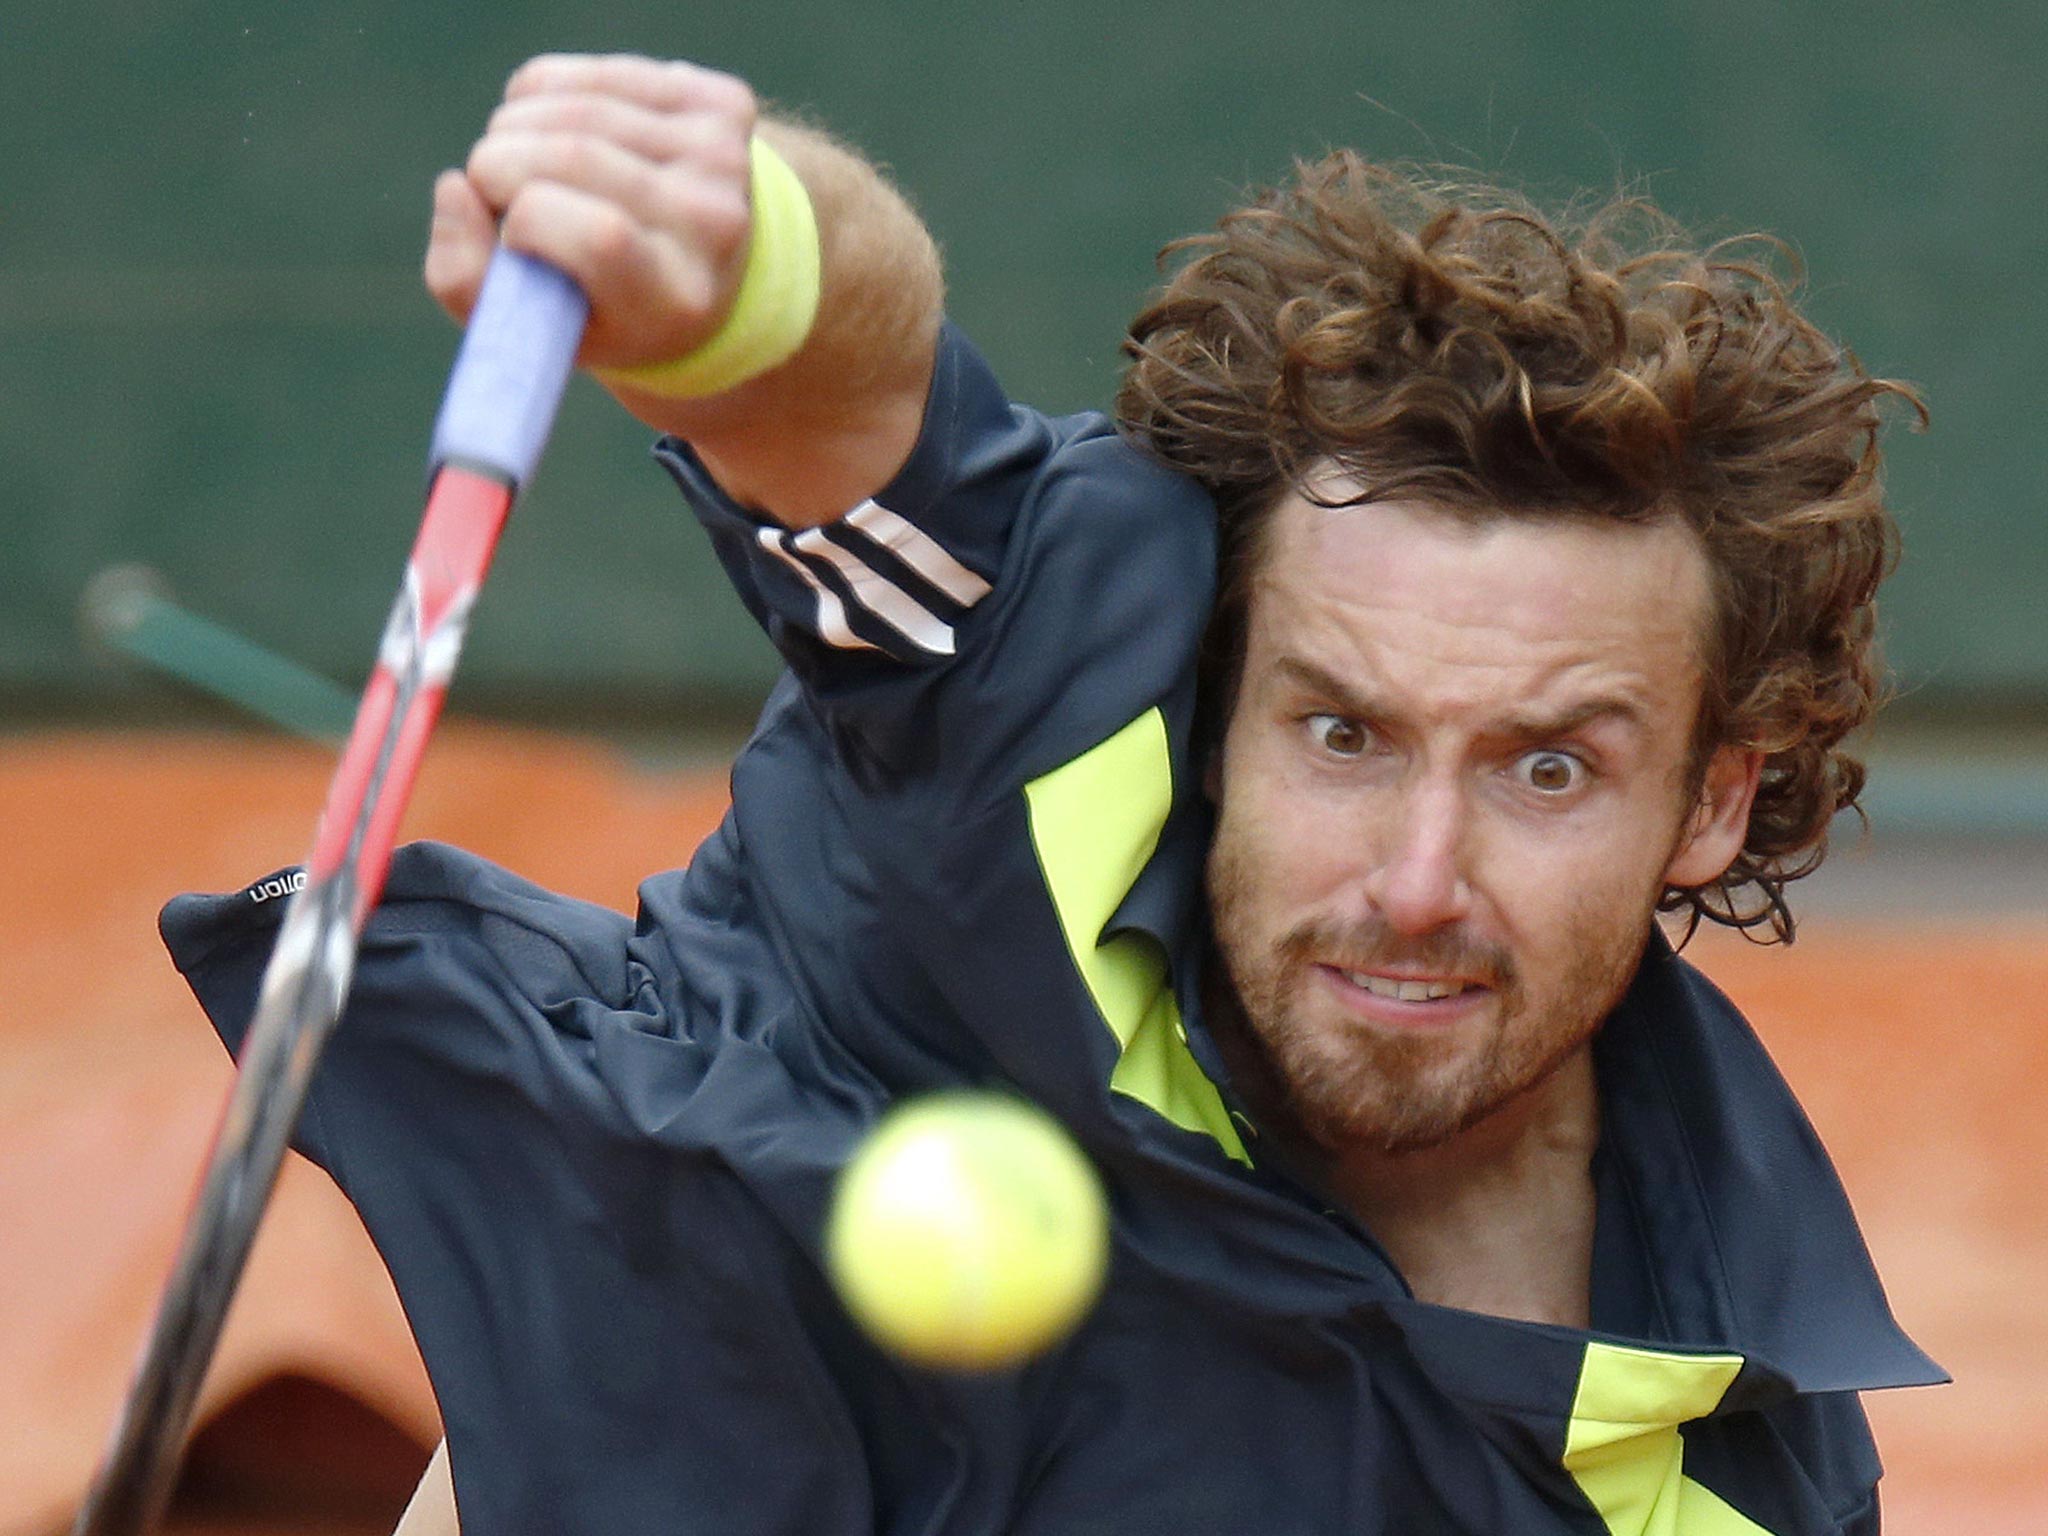 French Open: Maverick Gulbis rides ‘last train’ to Federer test | The ...